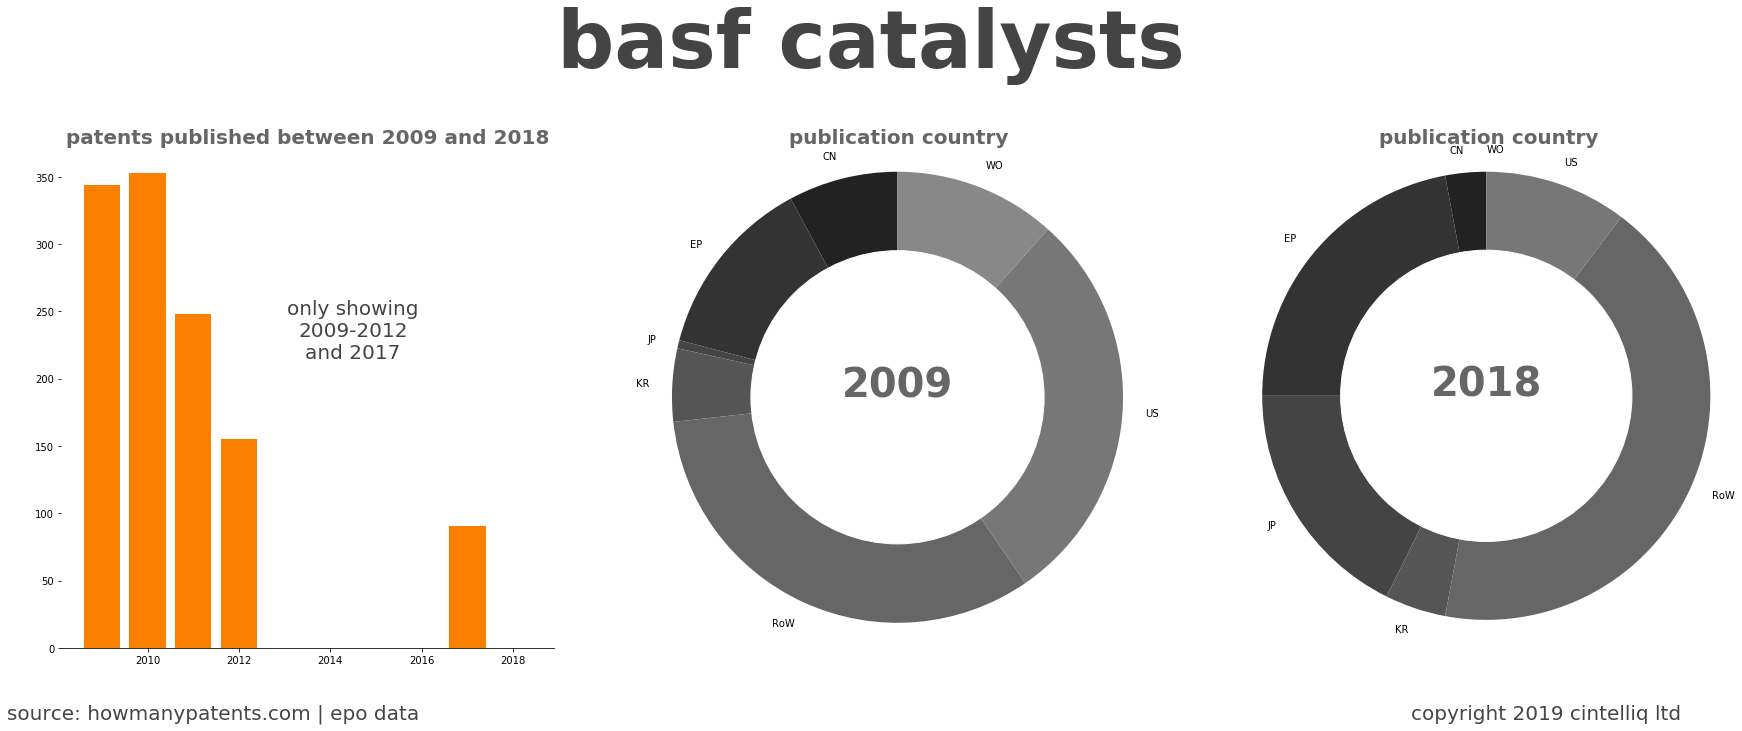 summary of patents for Basf Catalysts